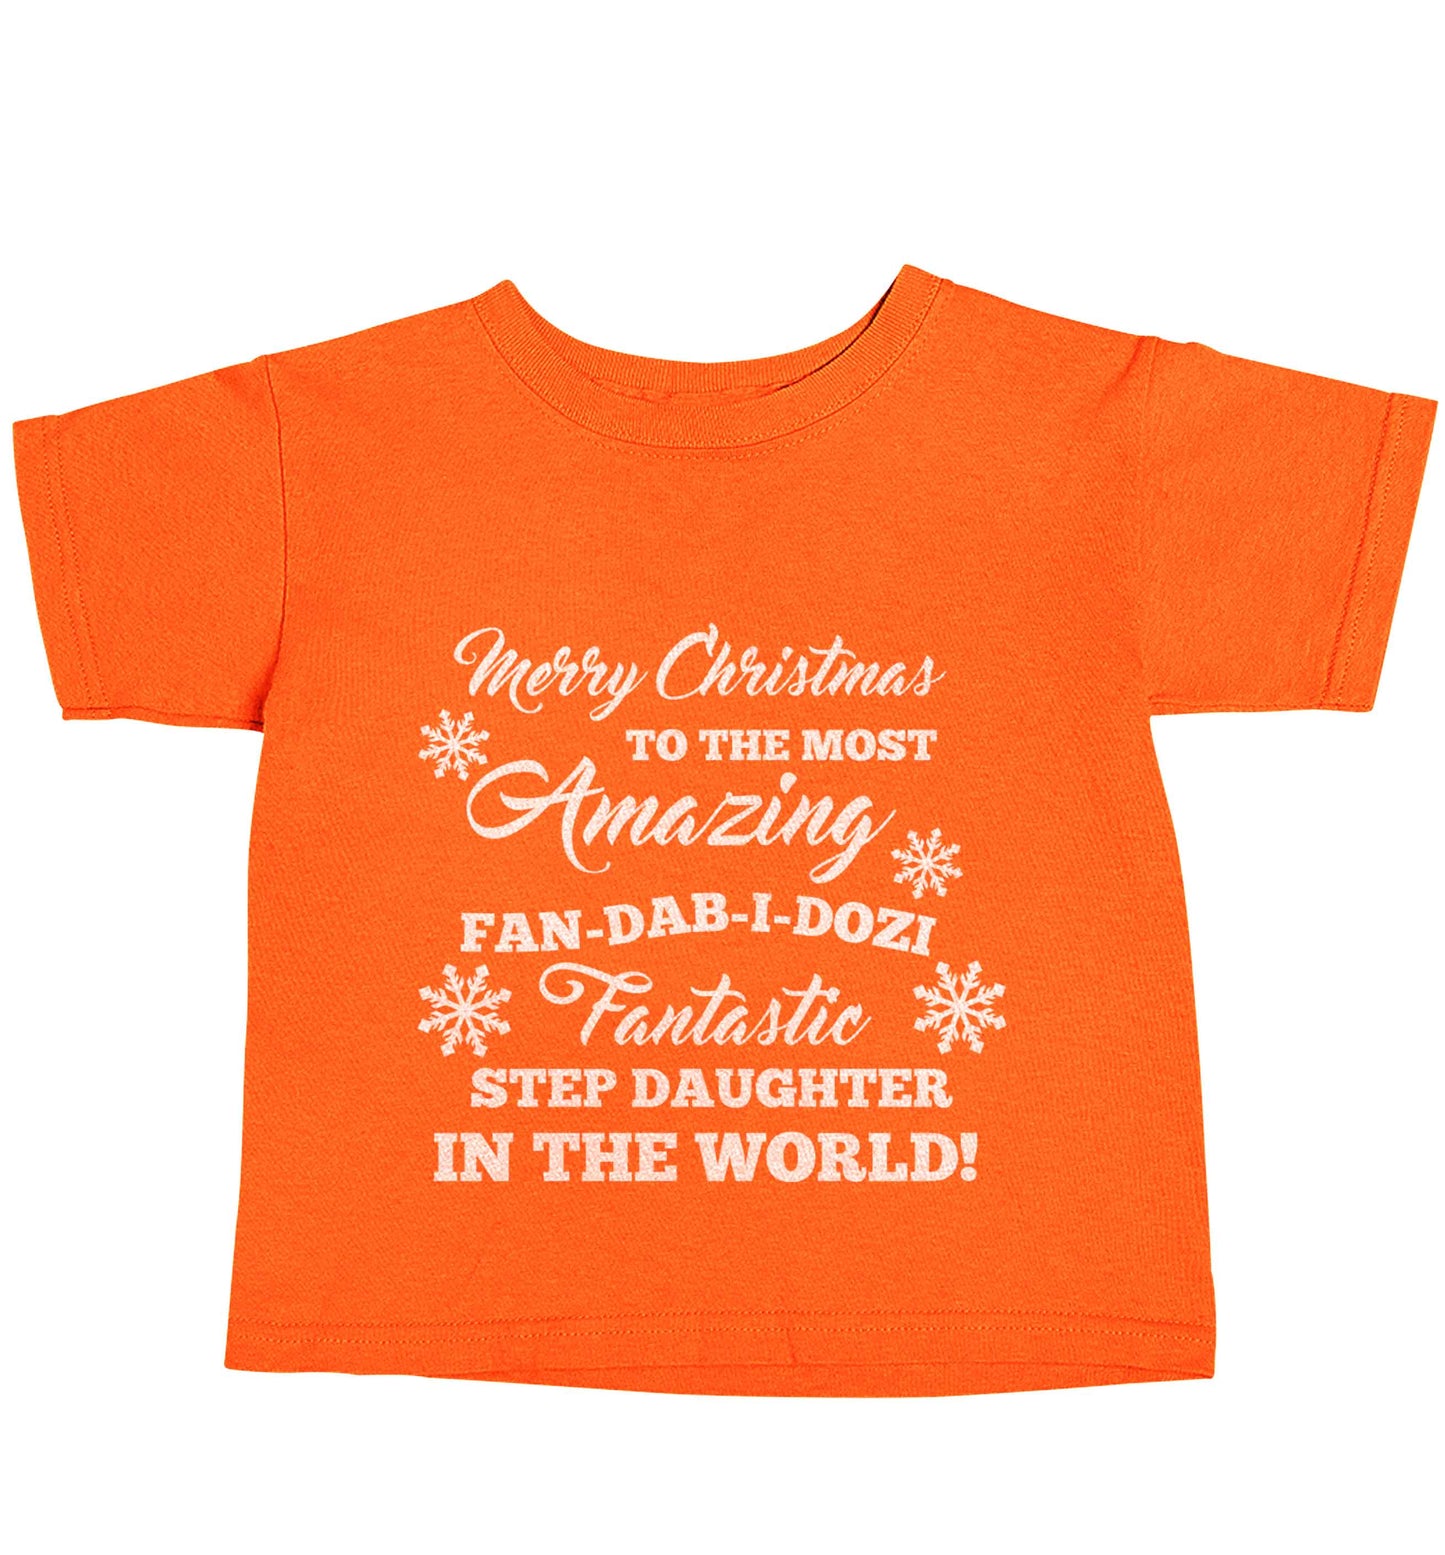 Merry Christmas to the most amazing fan-dab-i-dozi fantasic Step Daughter in the world orange baby toddler Tshirt 2 Years